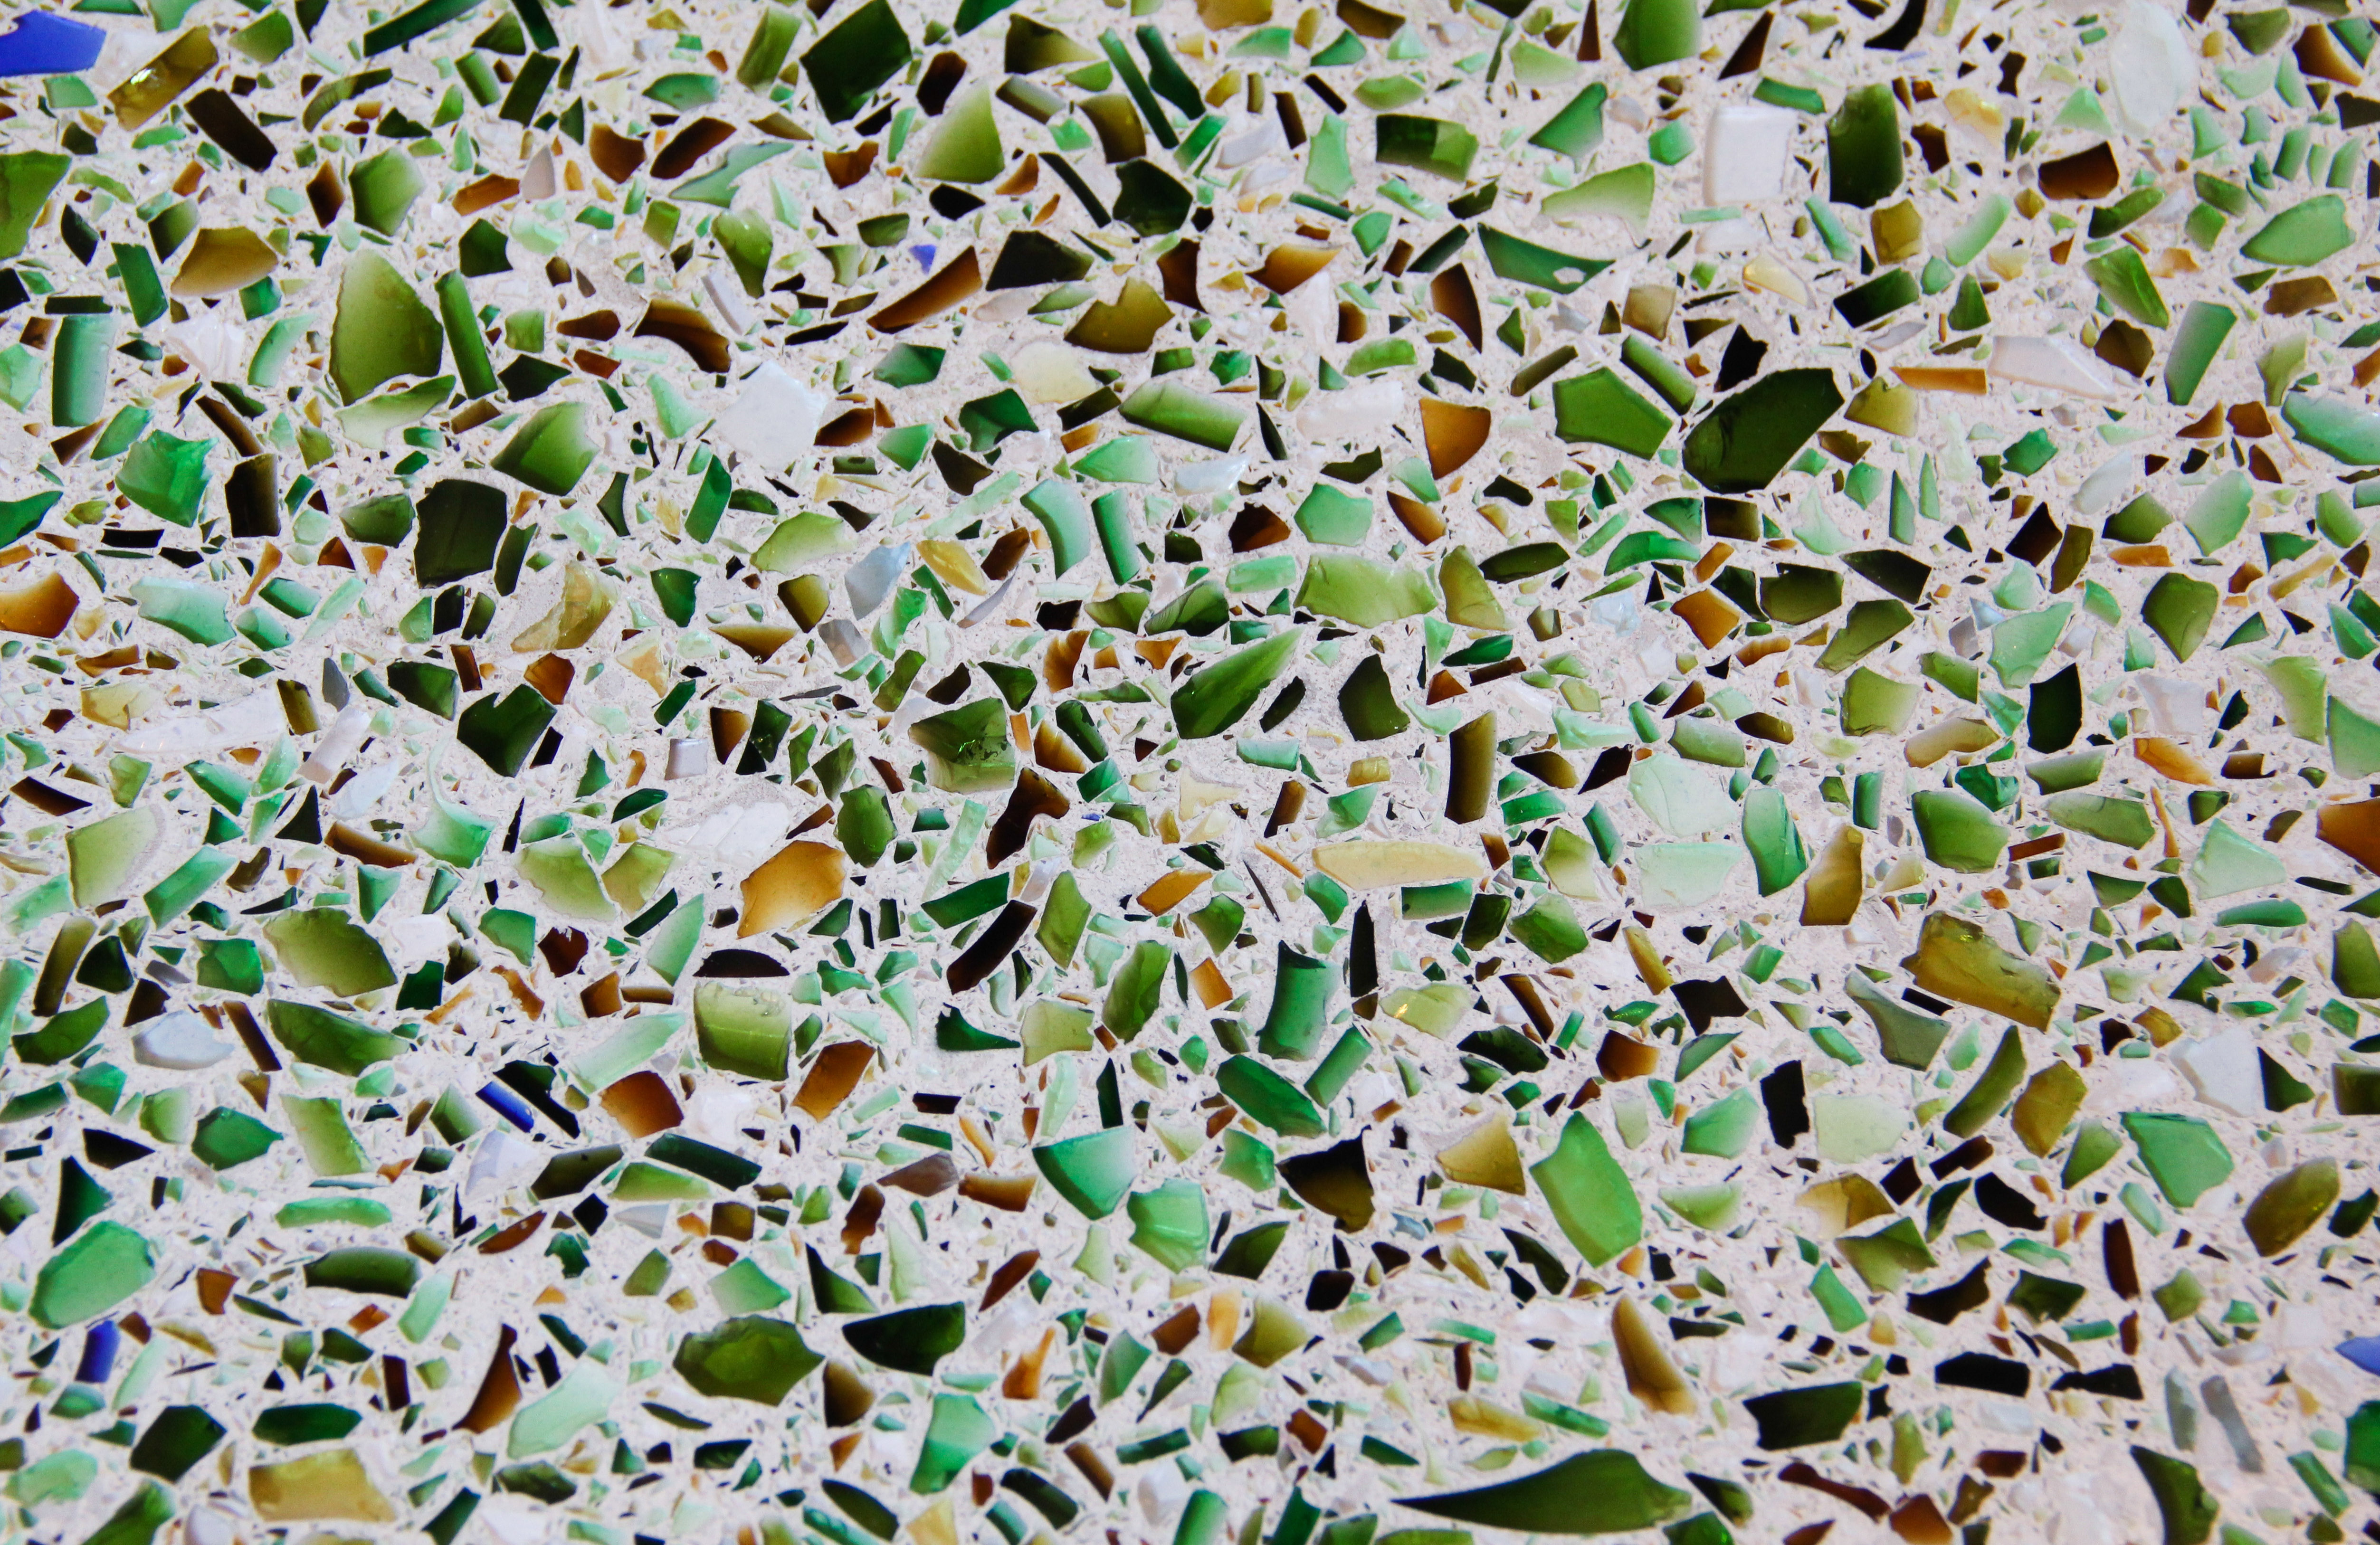 Chipped Glass Texture counter surface green cracked broken ...